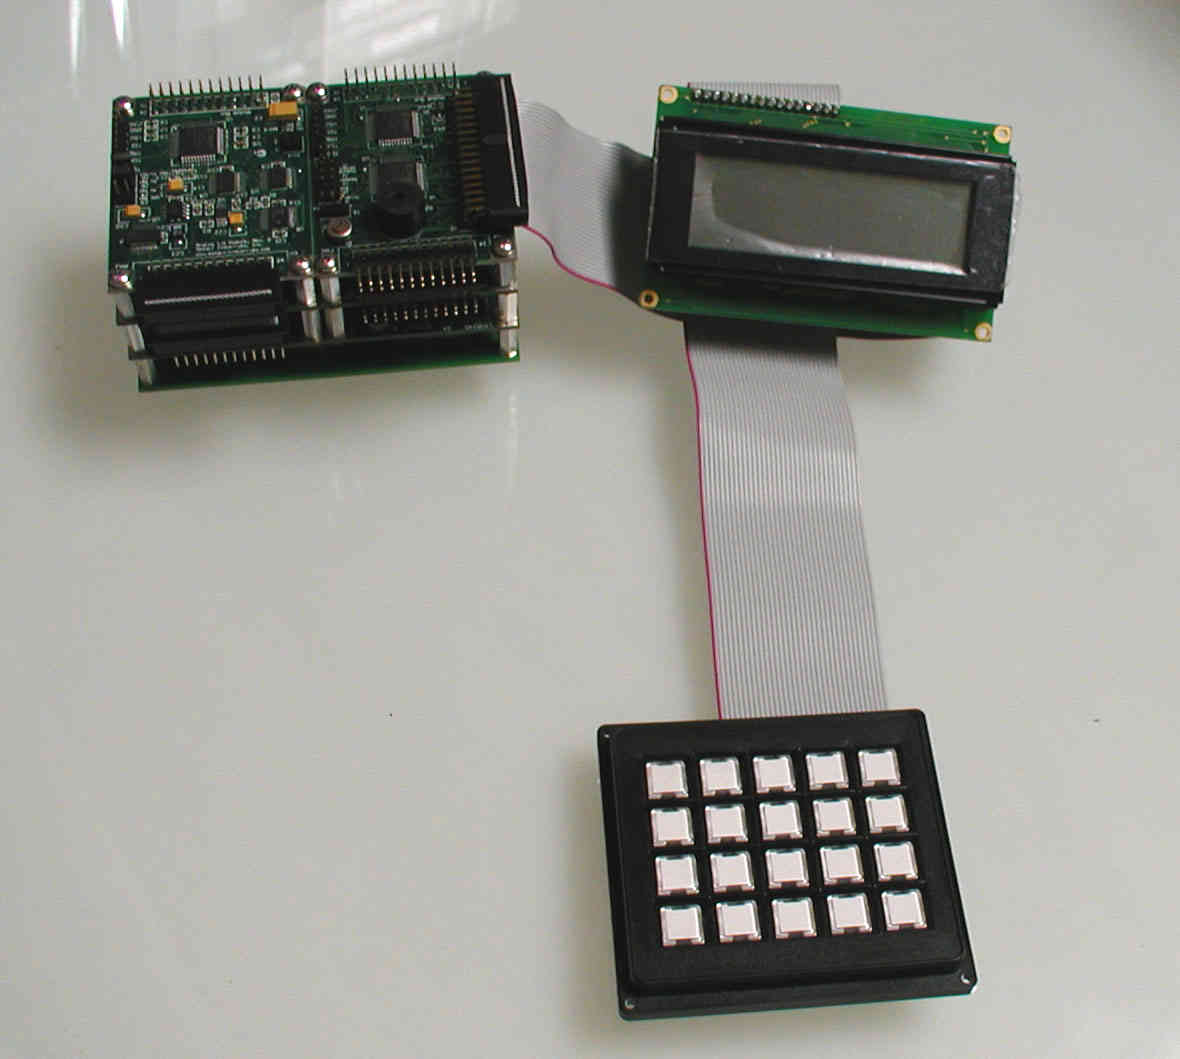 Instrument stack showing keypad and display